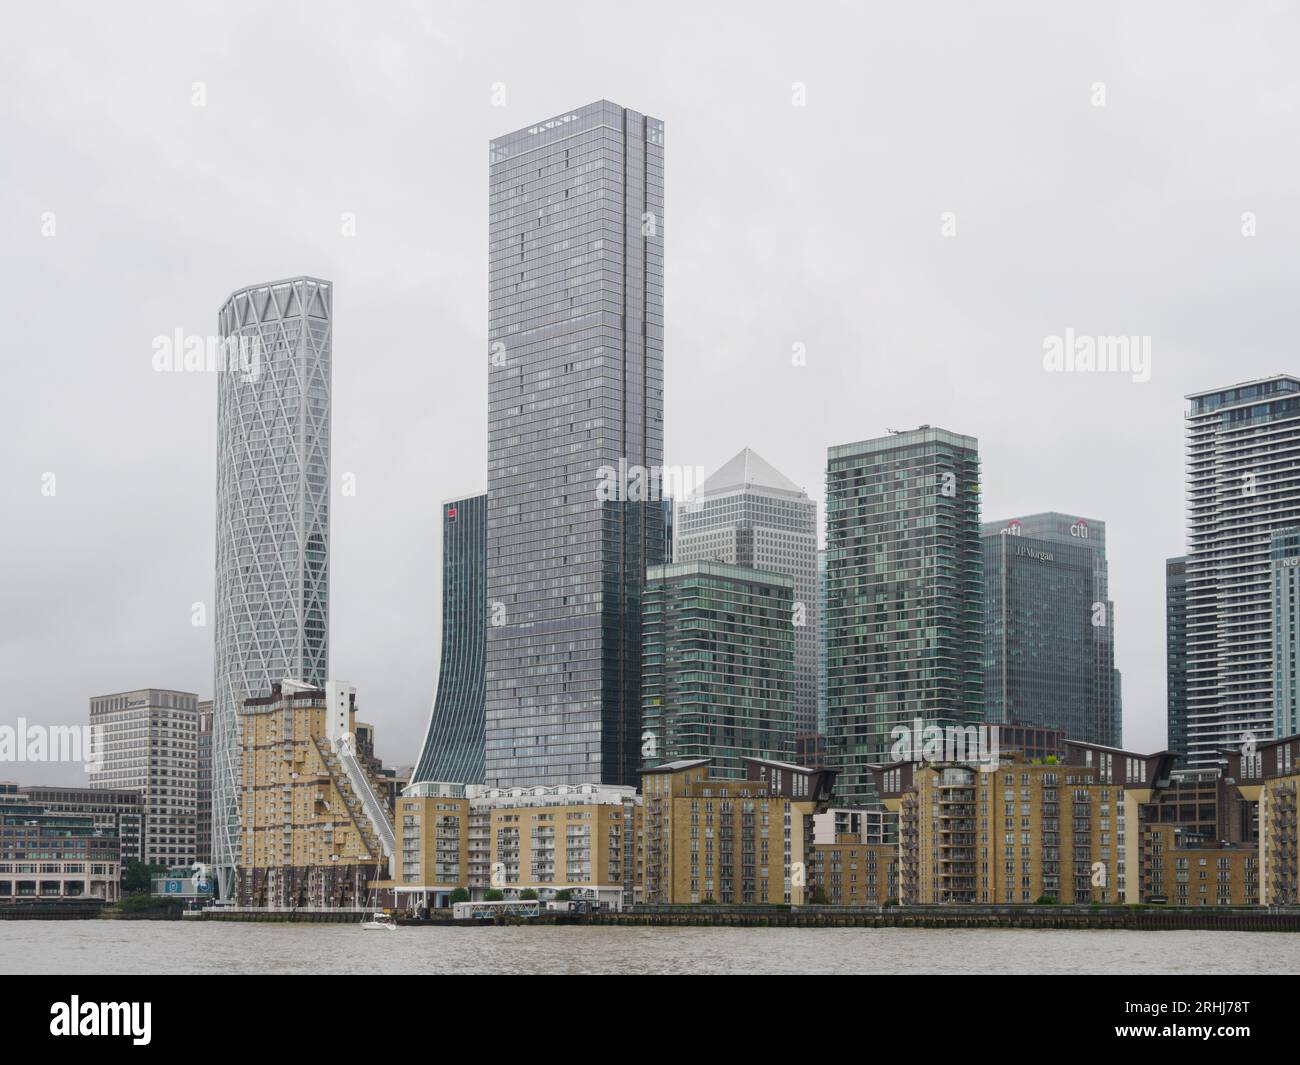 Canary Wharf financial centre from the South Bank of the River Thames in London UK on a grey and gloomy day Stock Photo